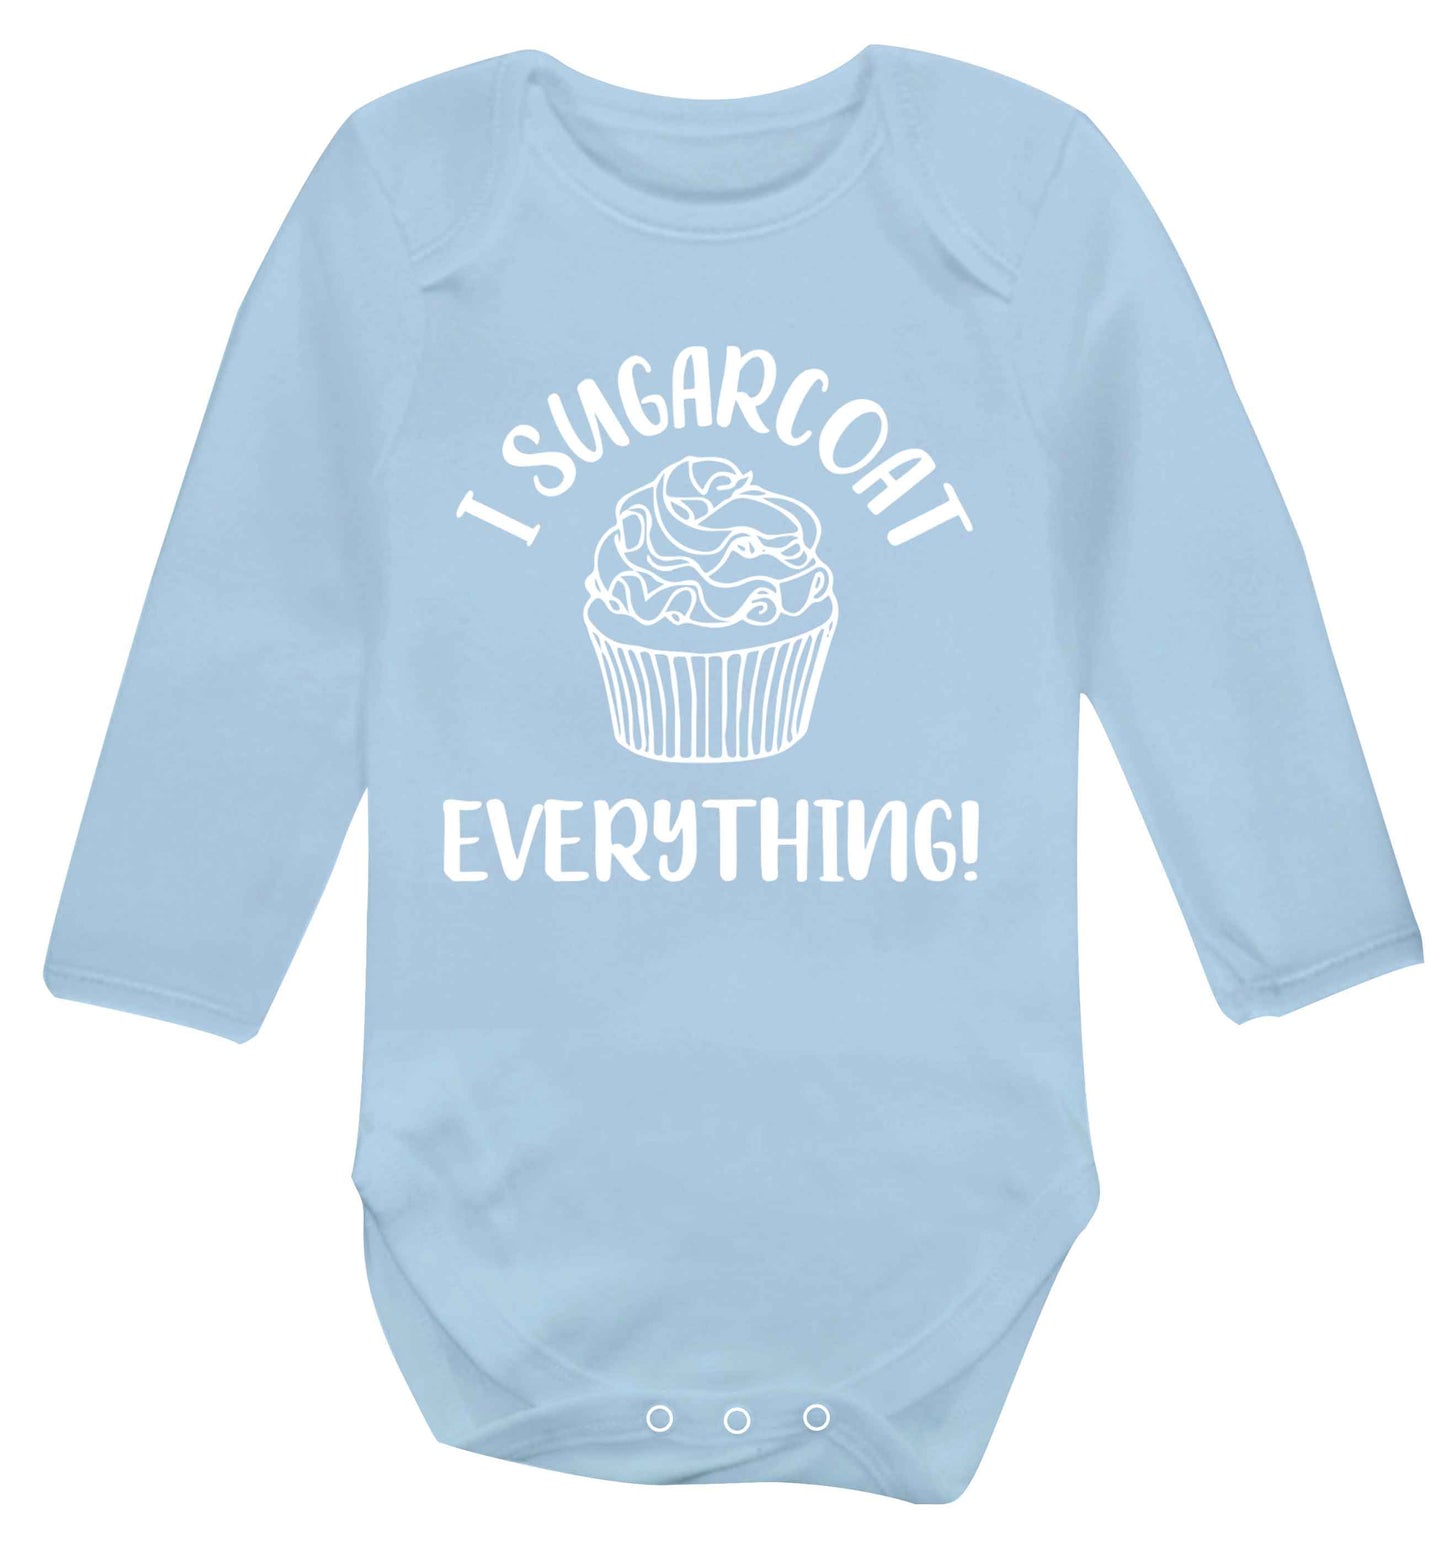 I sugarcoat everything Baby Vest long sleeved pale blue 6-12 months